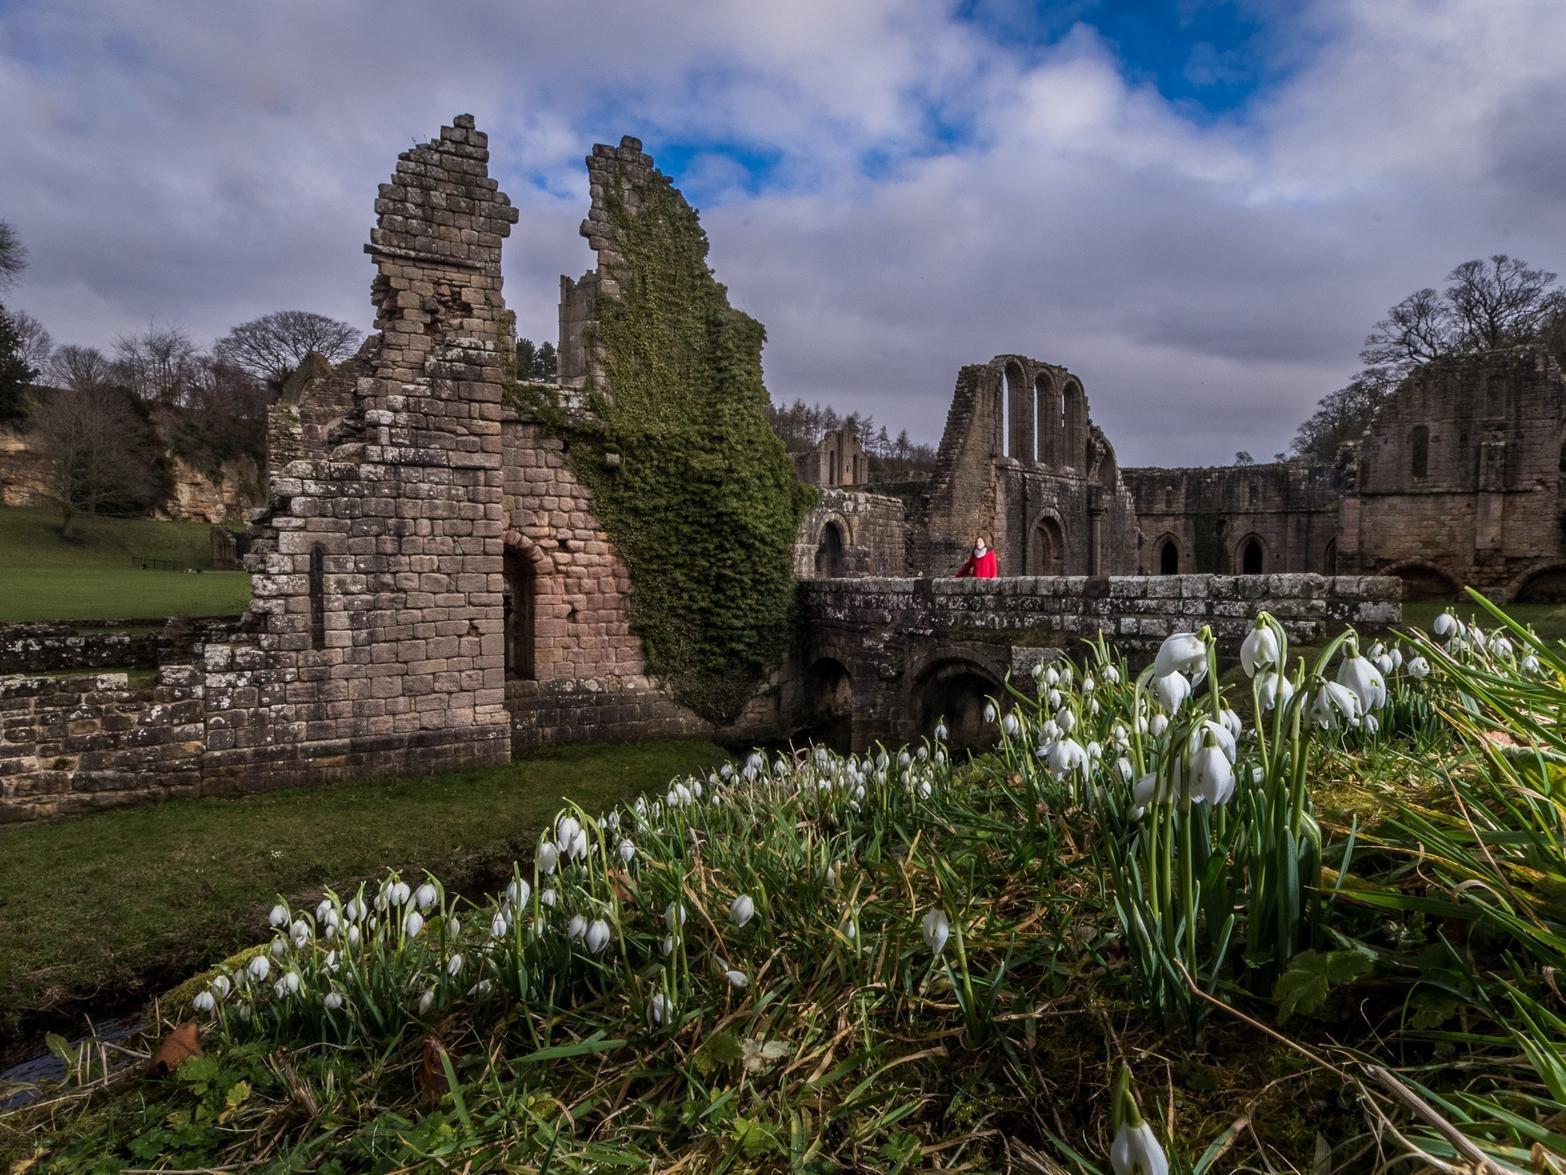 Fountains Abbey was built in 1132, the sound of monks chanting has been heard many times during the evening, especially in the area of the Chapel of the Nine Altars at the east end of the church.